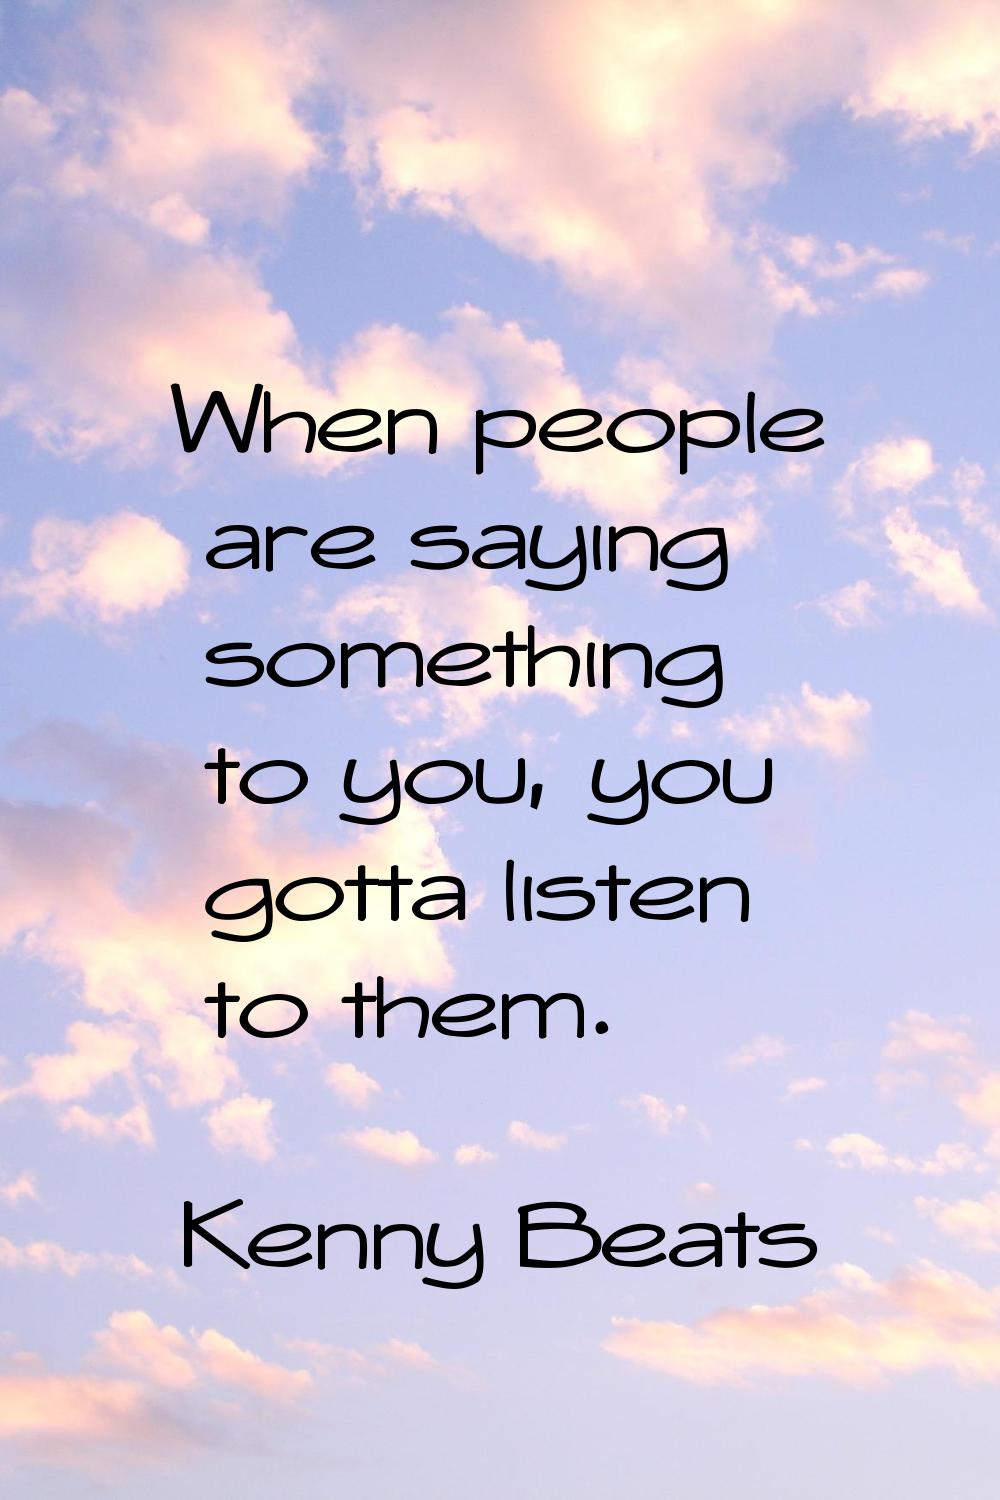 When people are saying something to you, you gotta listen to them.